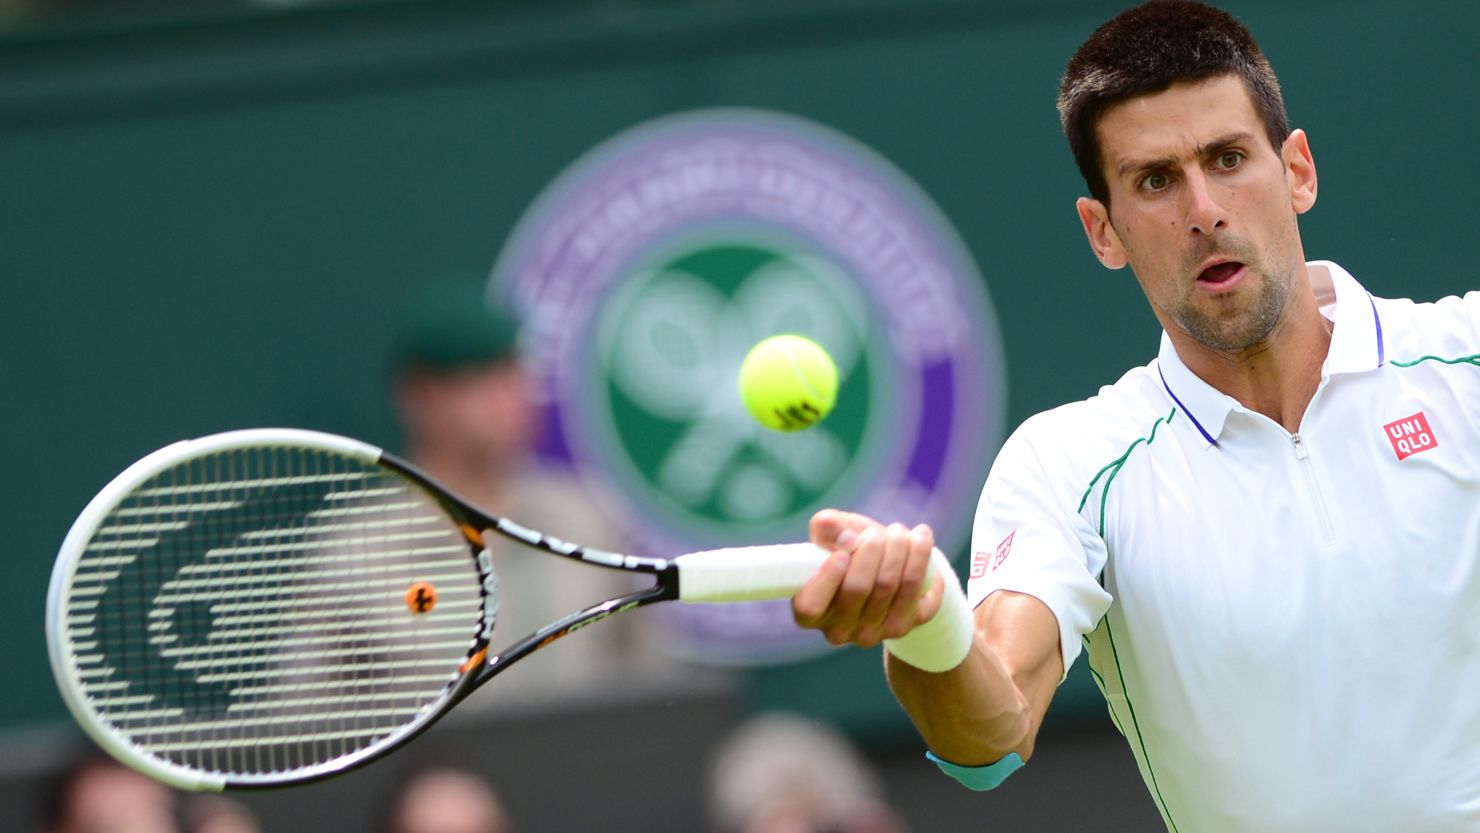 Serbia's Novak Djokovic won comfortably in his first match since losing the French Open final earlier this month.